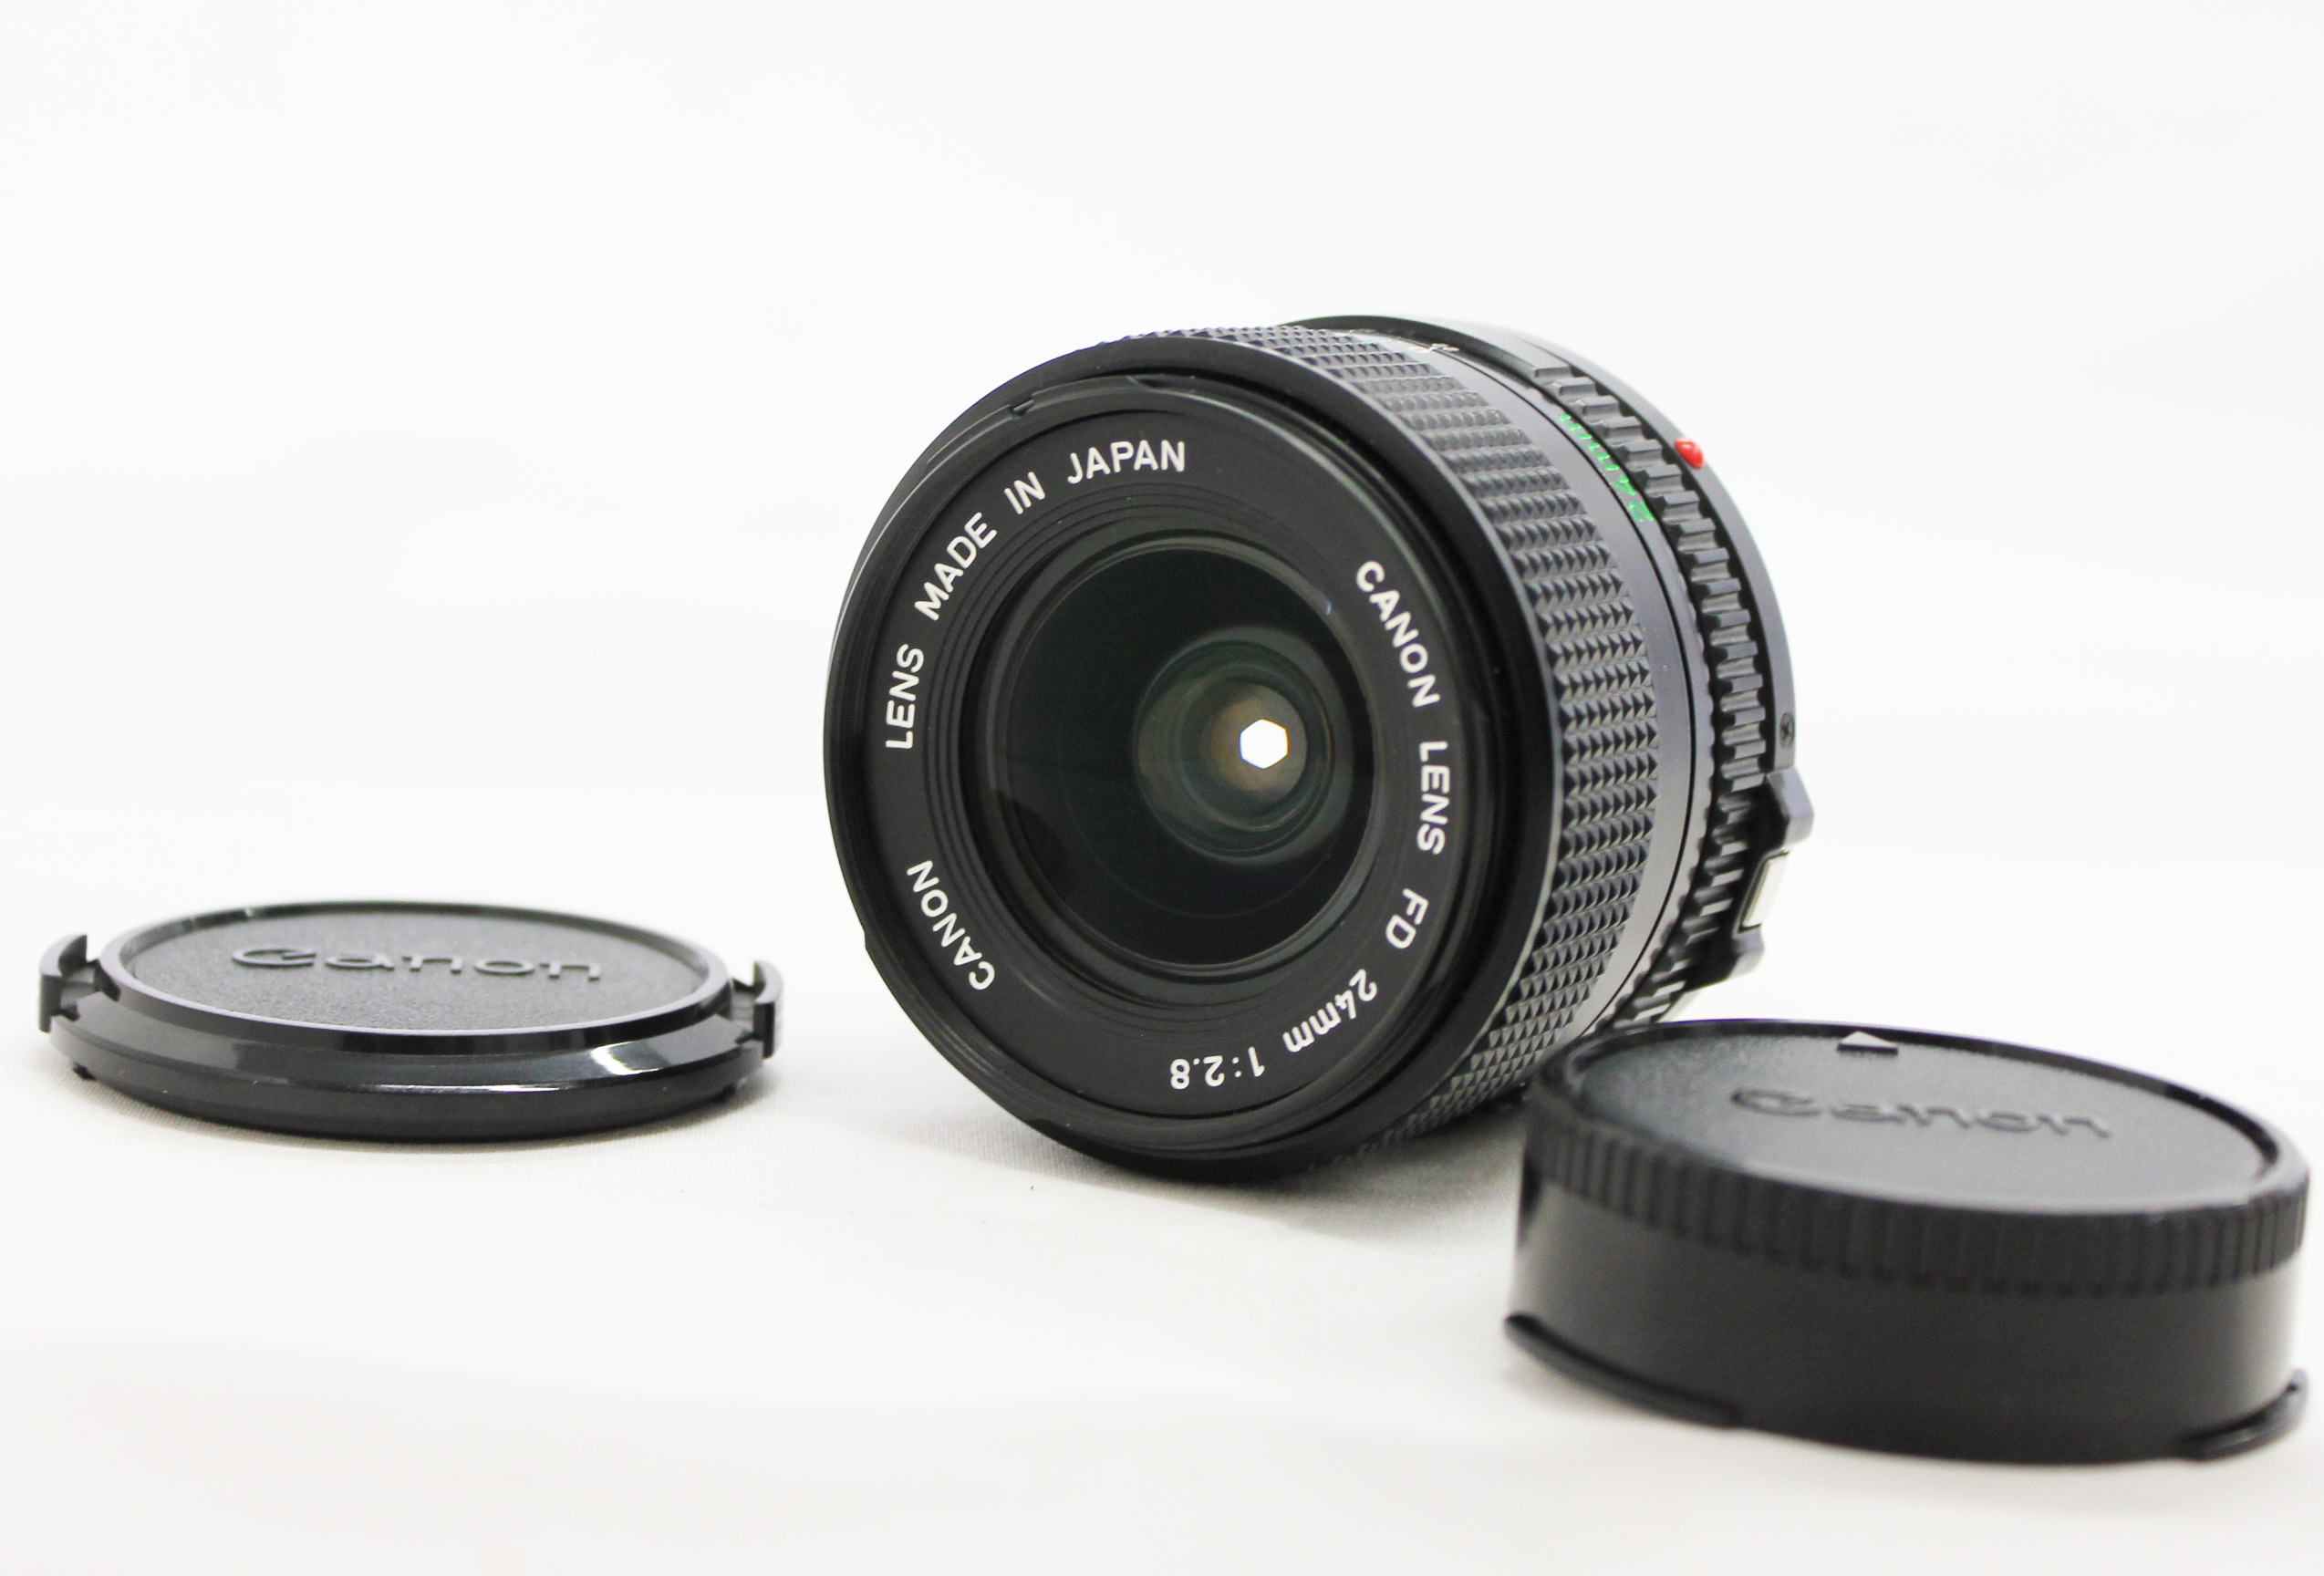 Japan Used Camera Shop | [Mint] Canon New FD NFD 24mm F/2.8 Wide Angle Lens from Japan